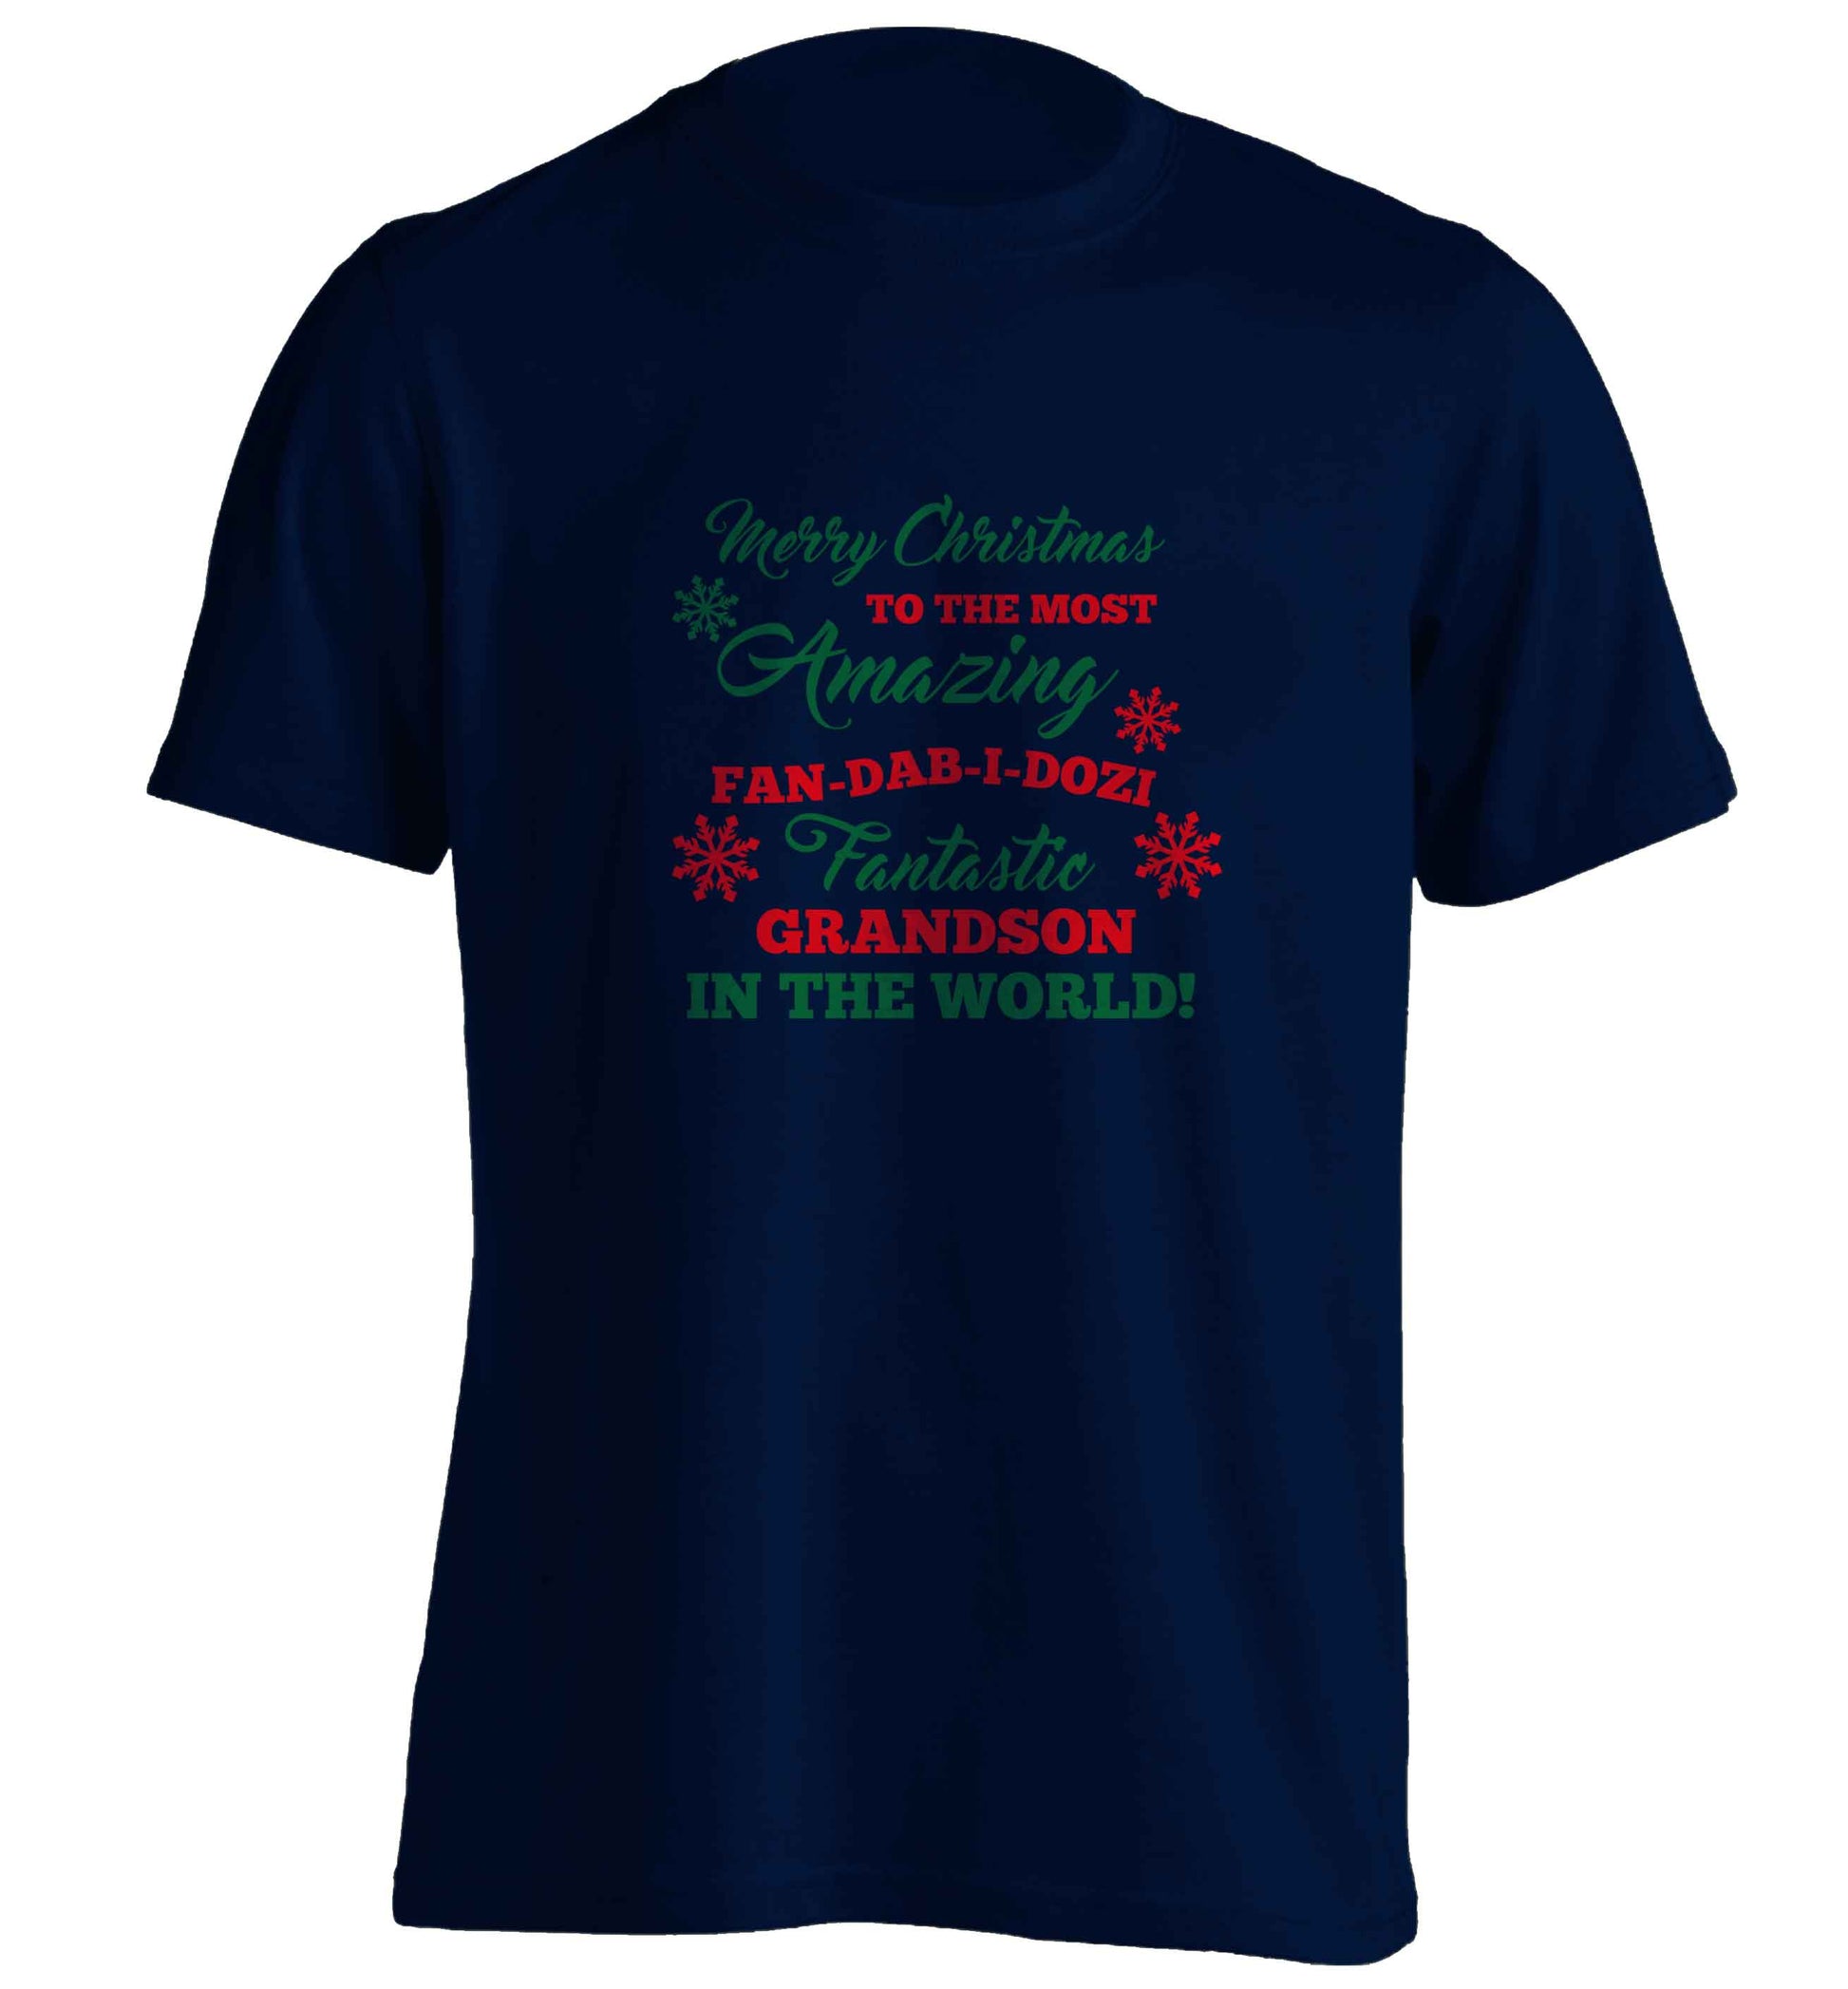 Merry Christmas to the most amazing fan-dab-i-dozi fantasic Grandson in the world adults unisex navy Tshirt 2XL